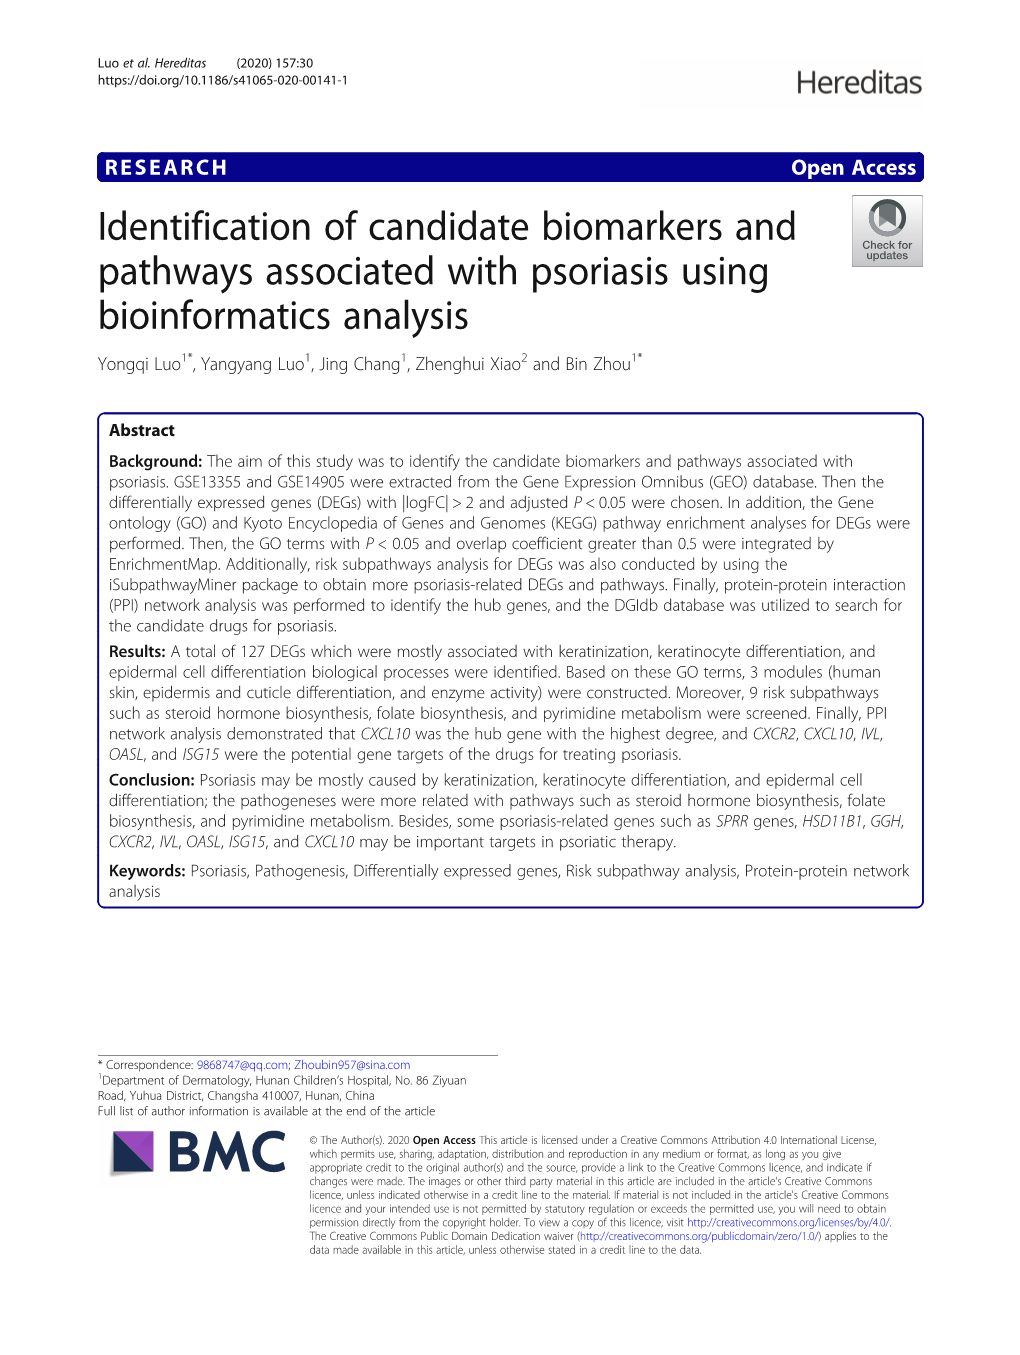 Identification of Candidate Biomarkers and Pathways Associated With